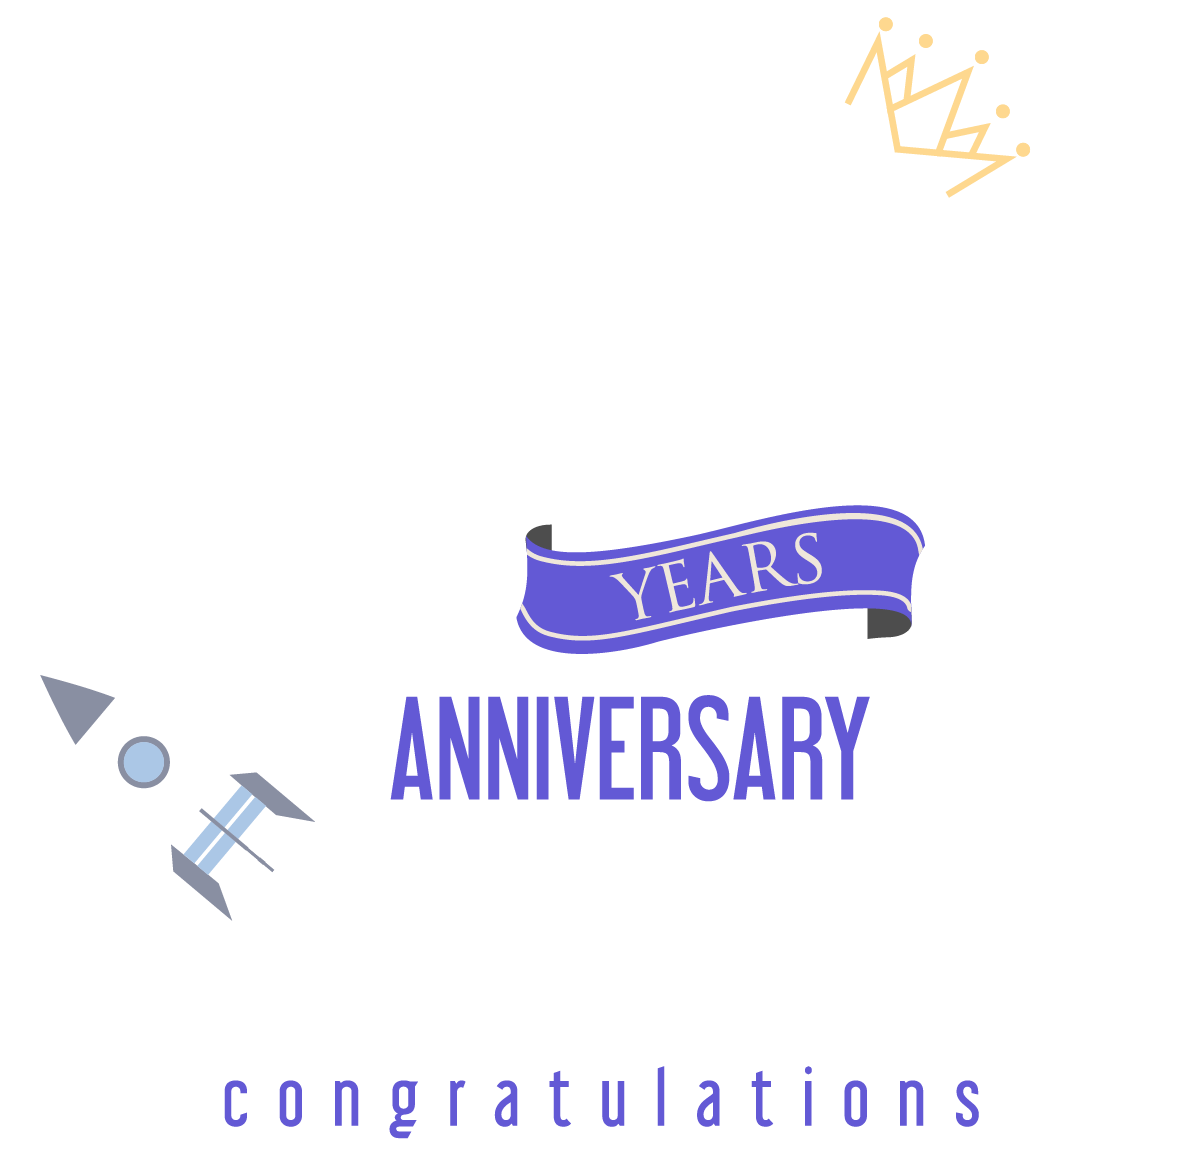 Thank you for 10 amazing years!